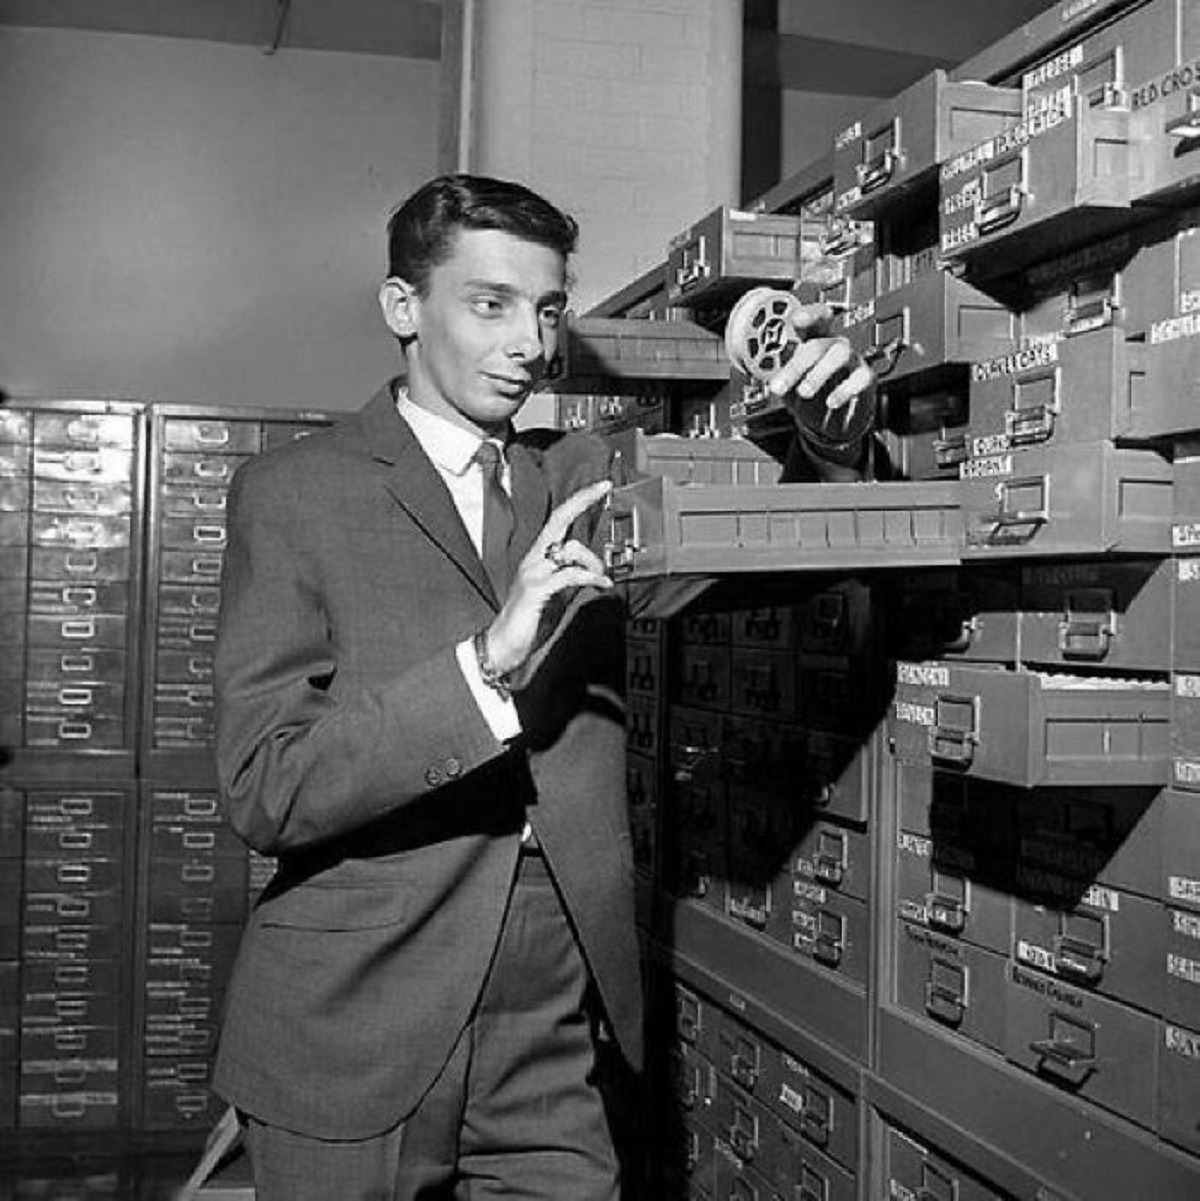 CBS Employee Barry Manilow In The File Room, 1965